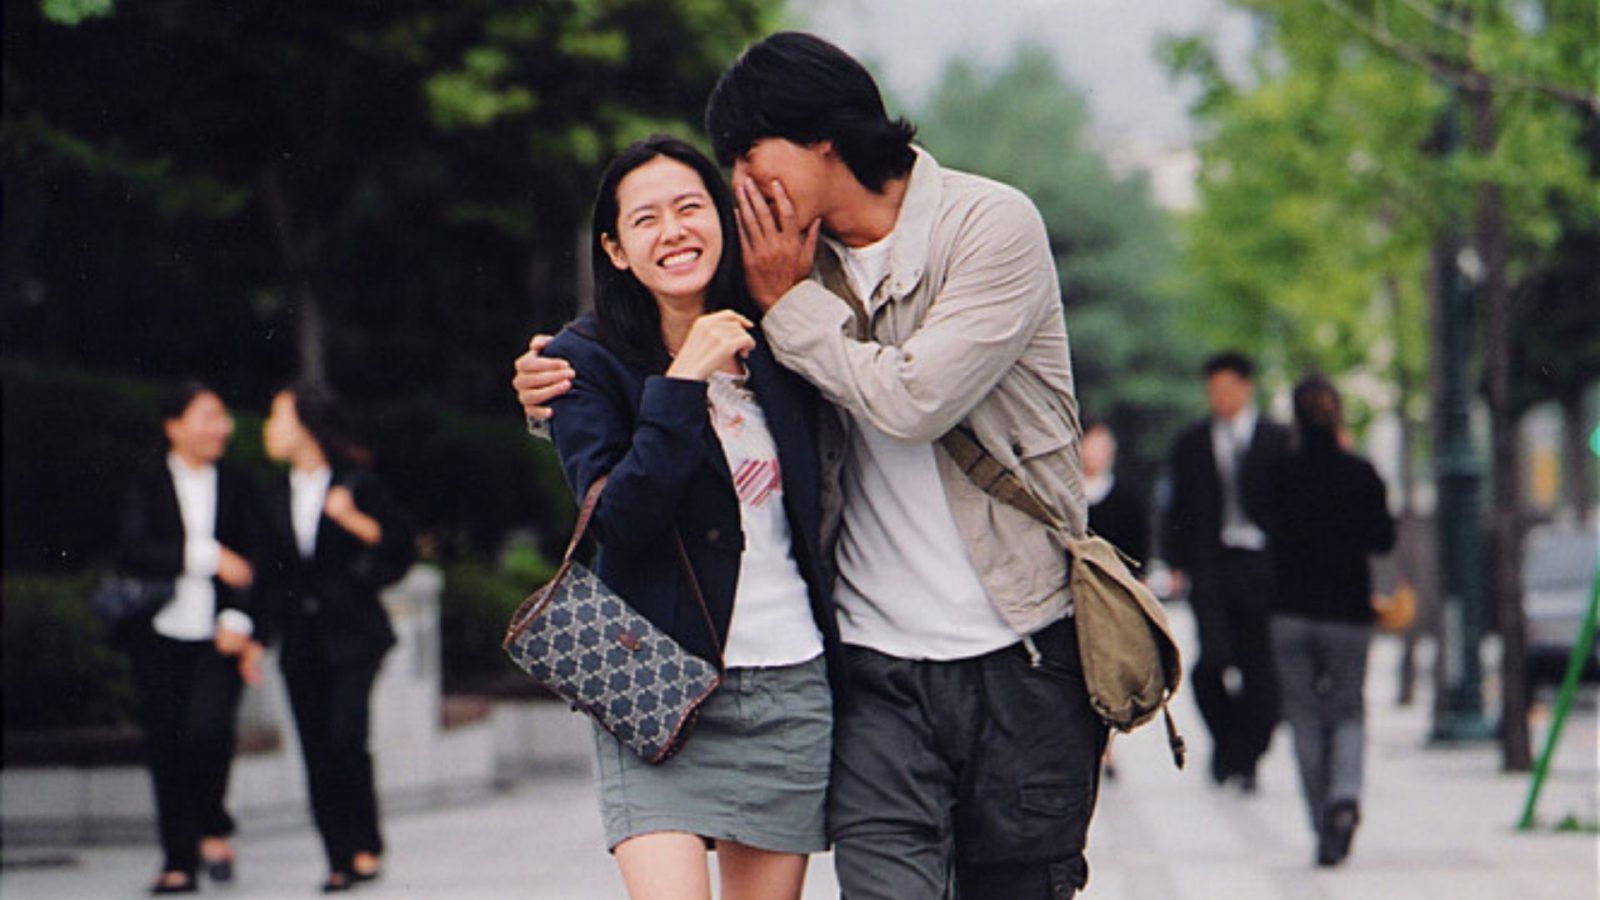 Best romantic Korean movies of all time to watch, ranked by IMDb ratings